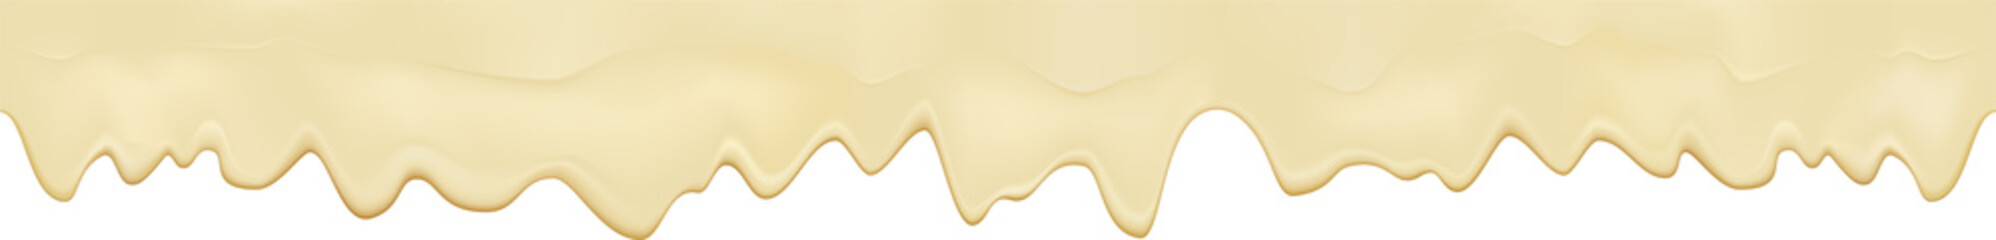 Liquid melted cheese white seamless texture. Mayonnaise texture isolated on white background. Cream pouring border. Vector realistic illustration.